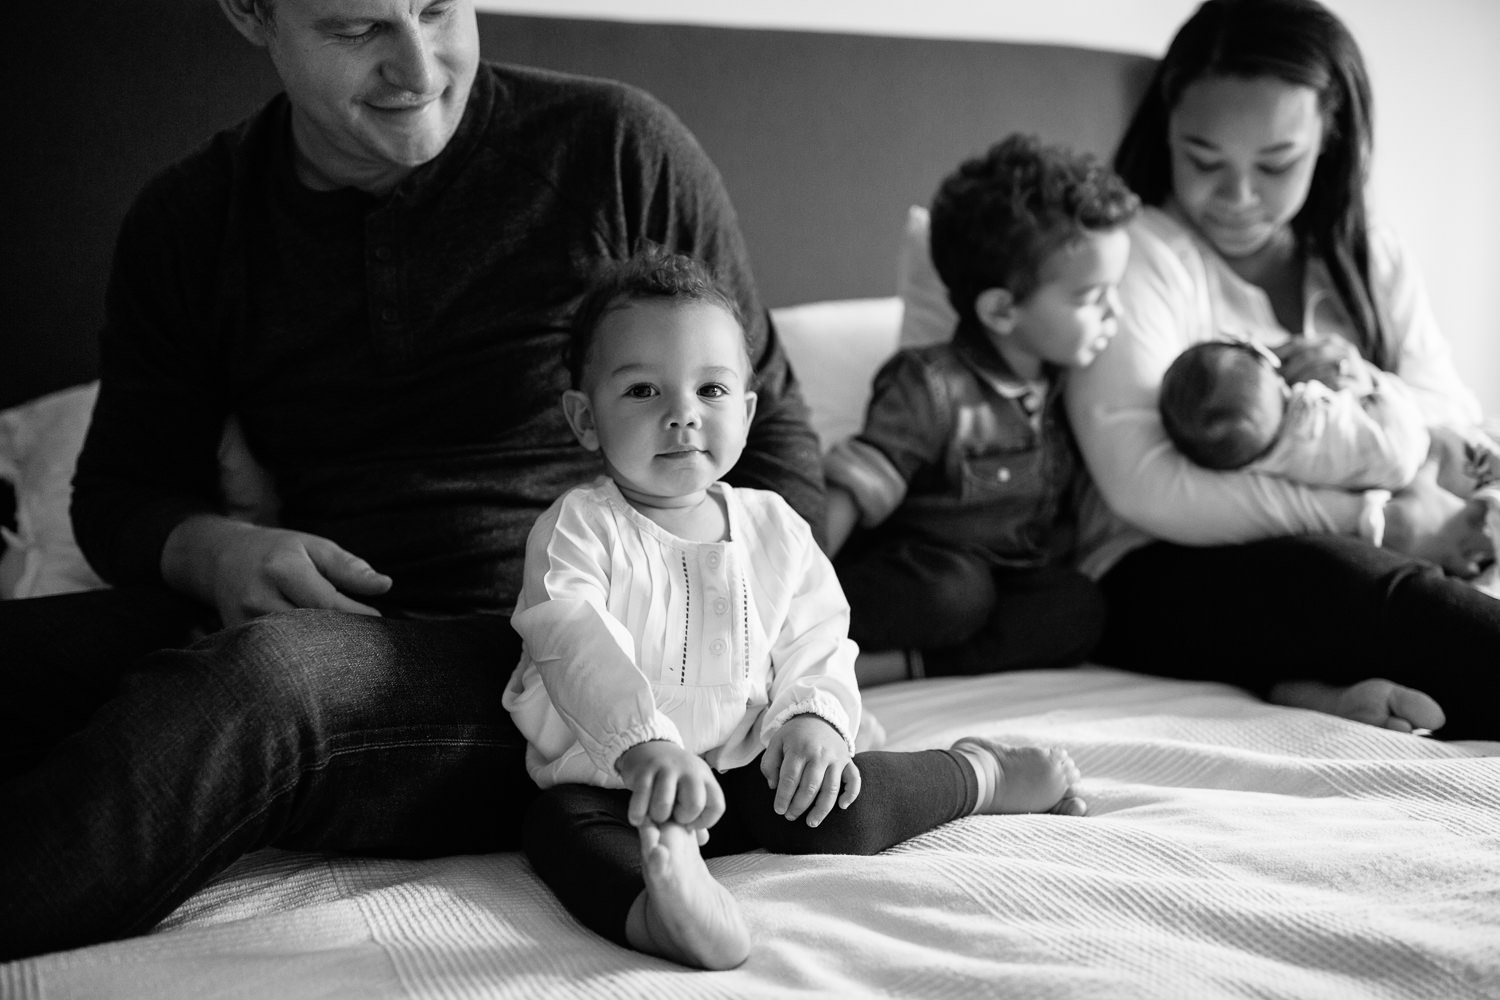 1 year old girl with dark hair and eyes sitting next to dad on master bed looking at camera, mom, brother and baby sister in background - Newmarket Lifestyle Photography